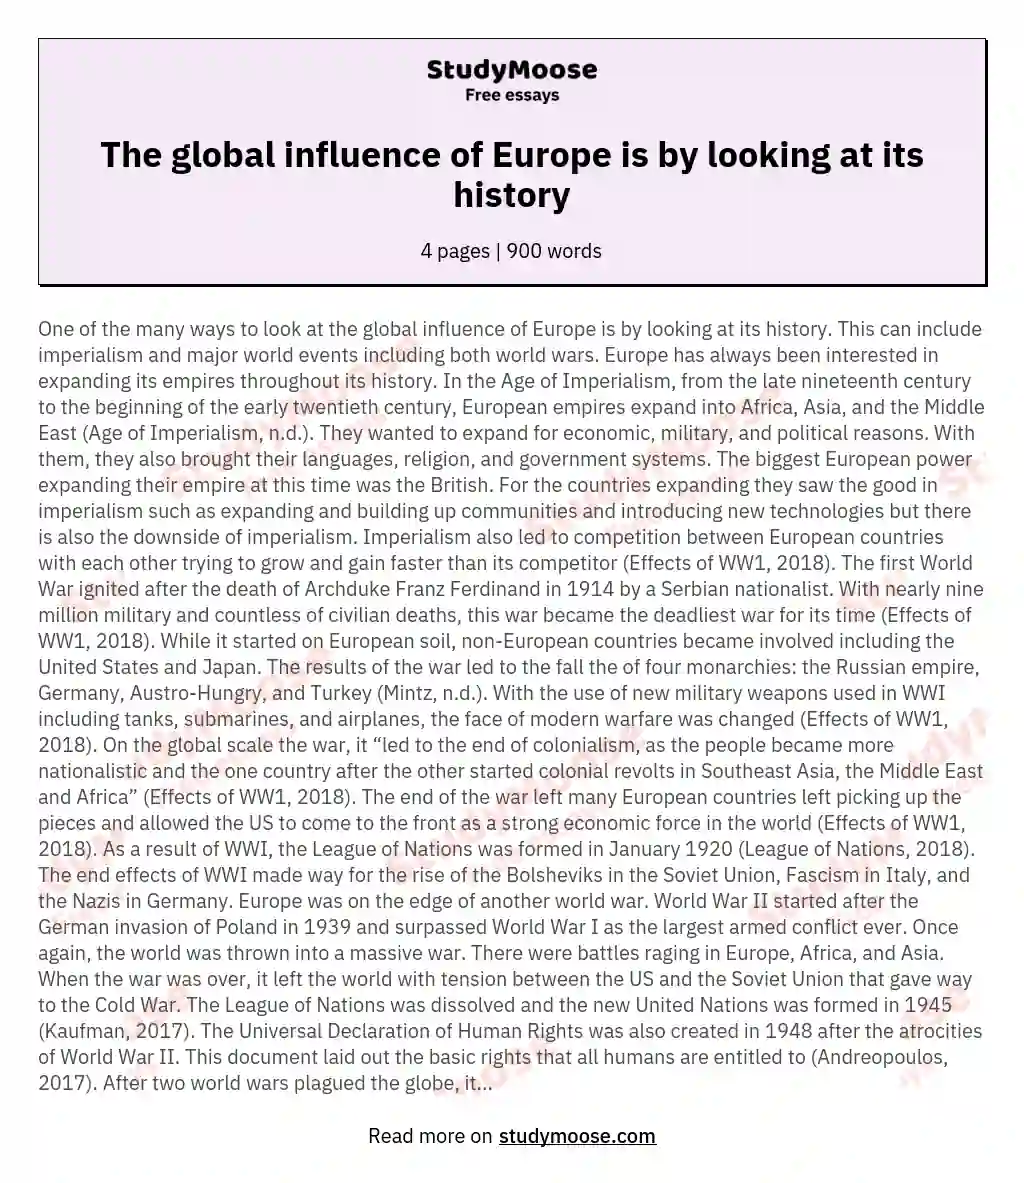 The global influence of Europe is by looking at its history essay